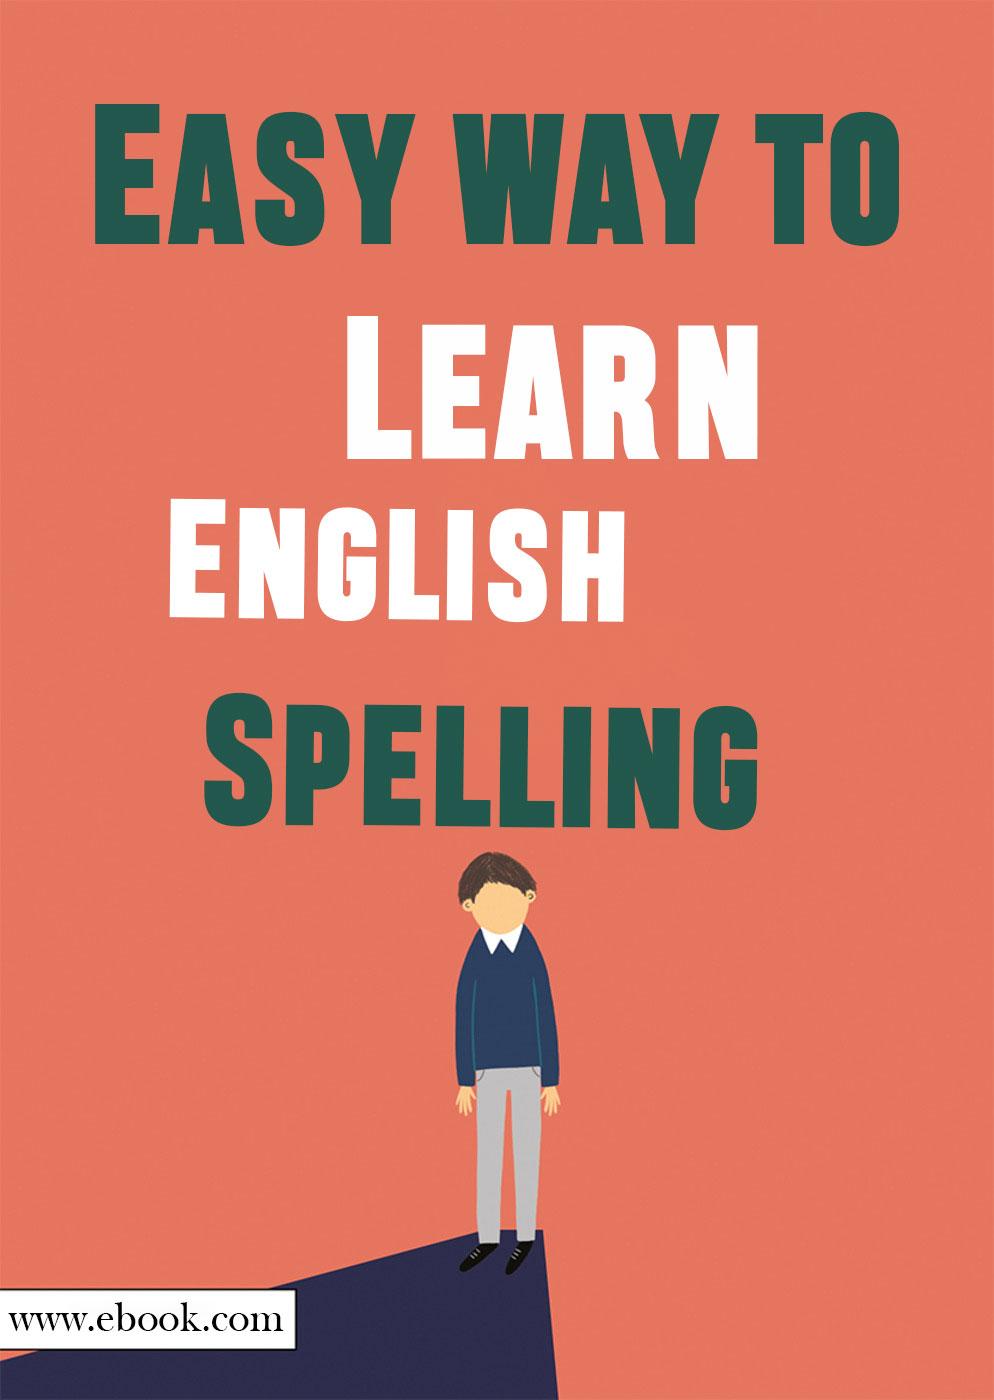 Thumbnail of Easy way to Learn English Spelling